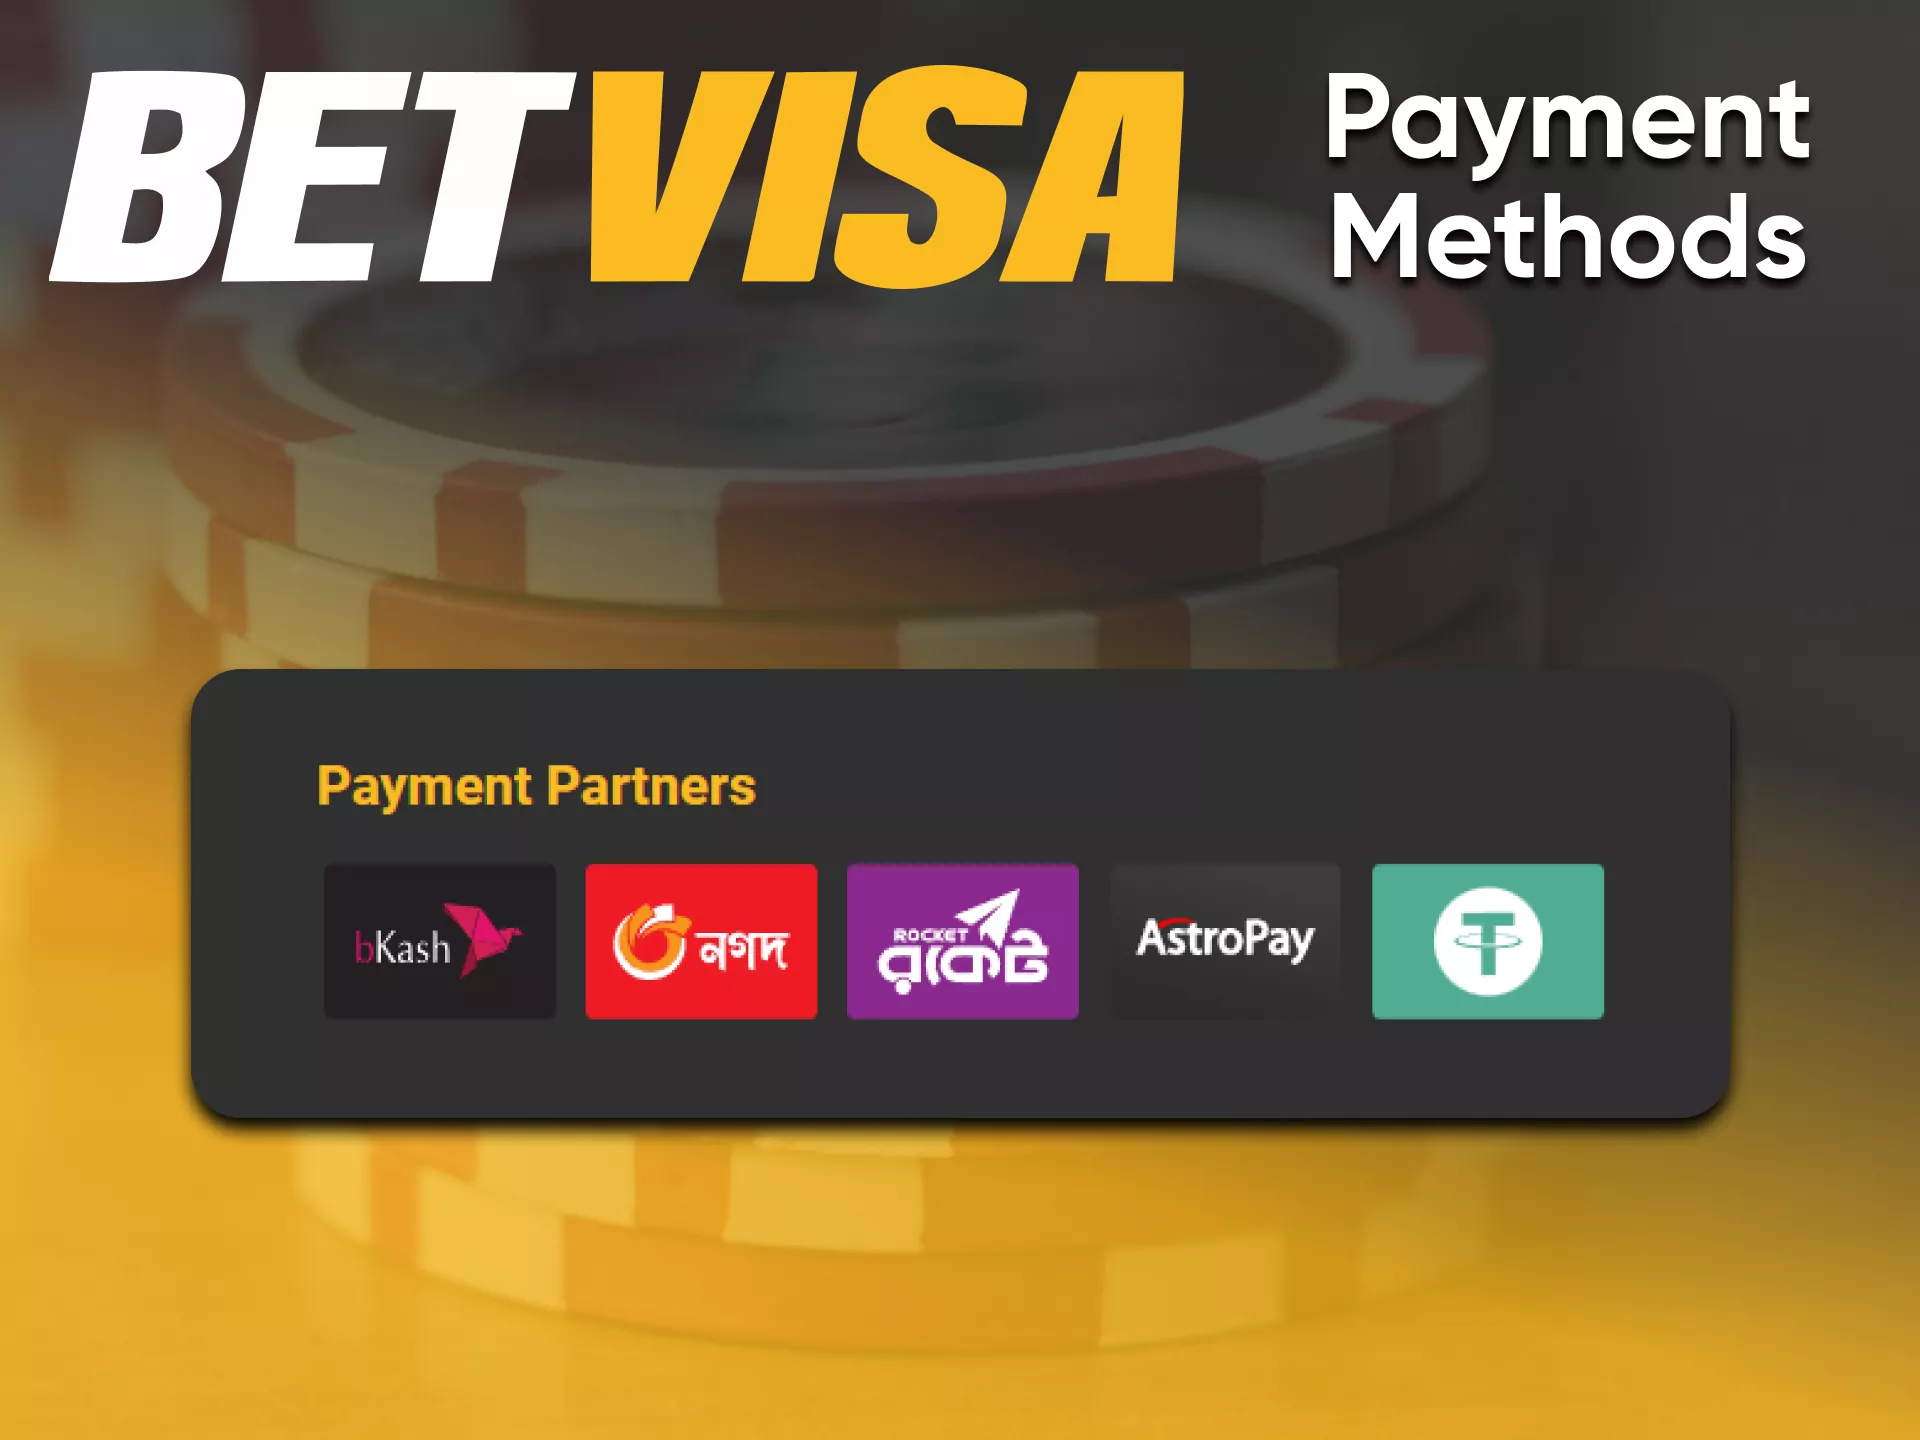 Payment deposit for the game casino BetVisa.